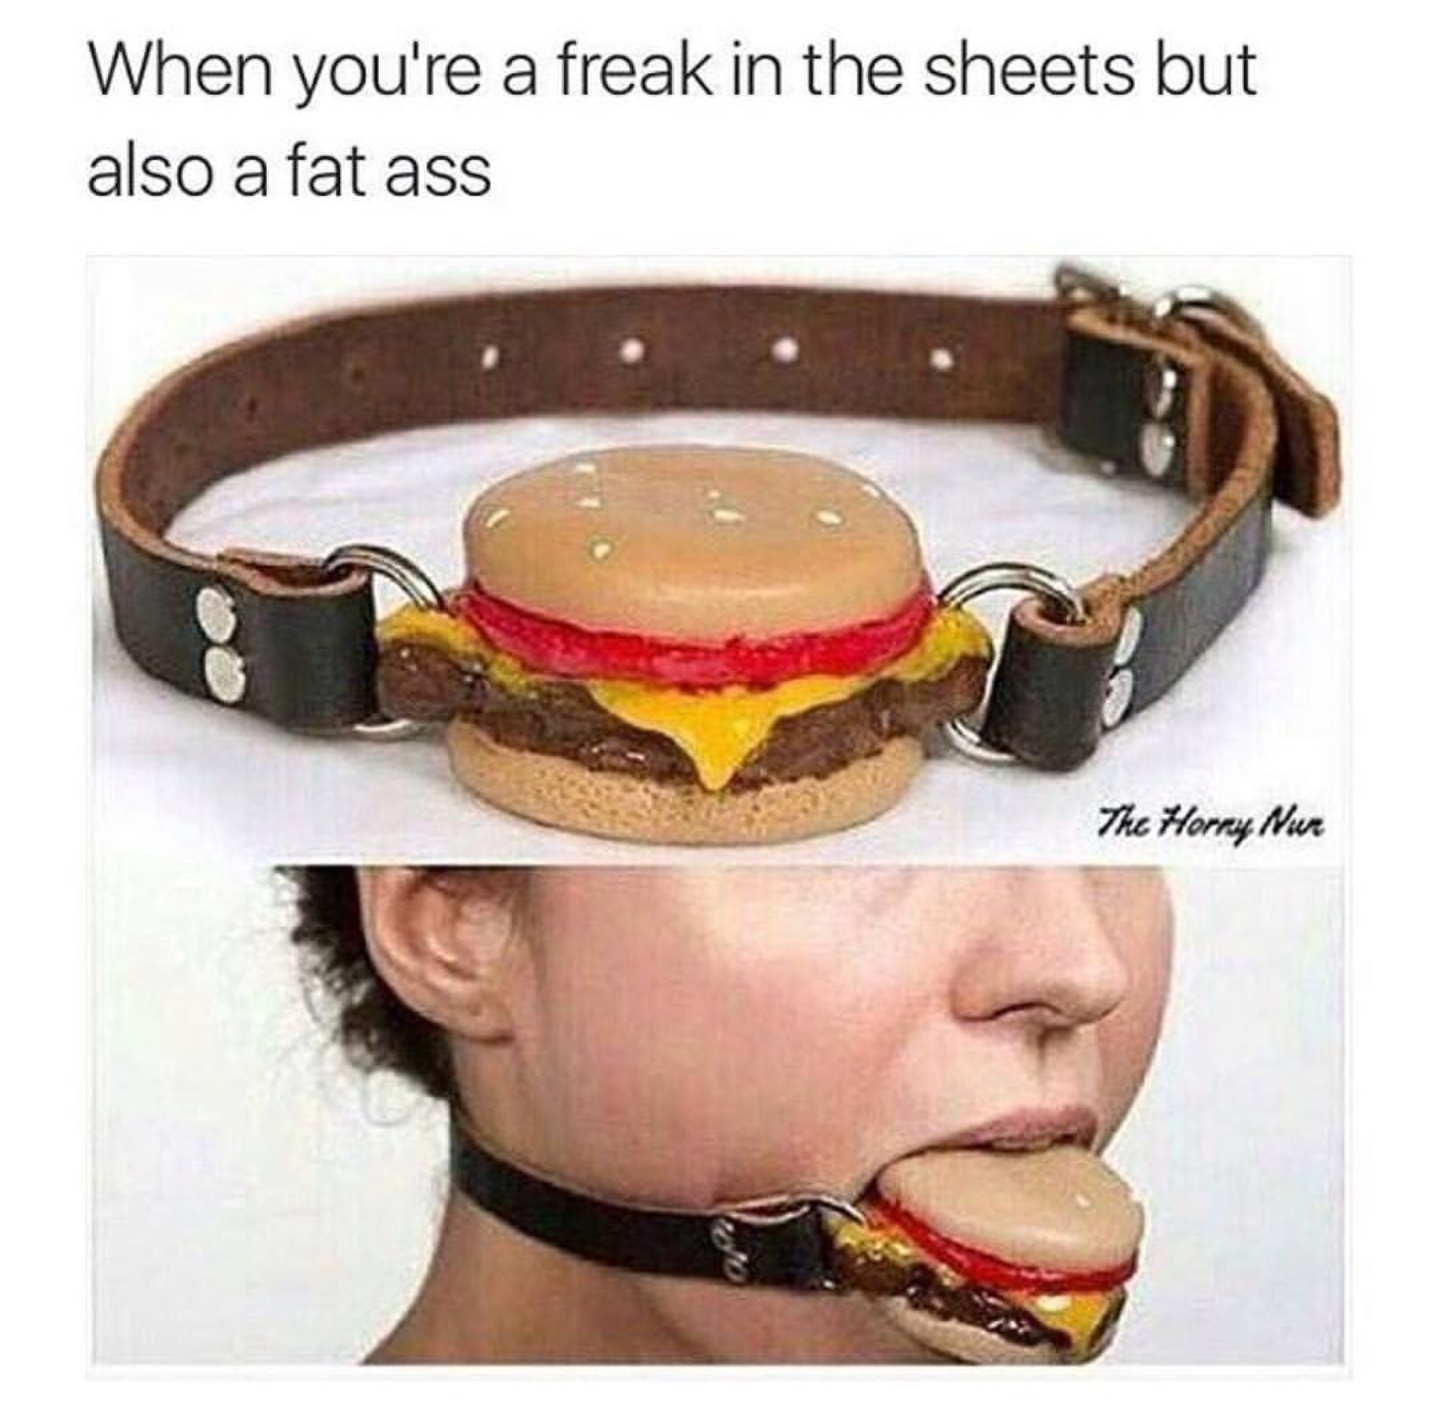 fat ass funny memes - When you're a freak in the sheets but also a fat ass The Horny Nur